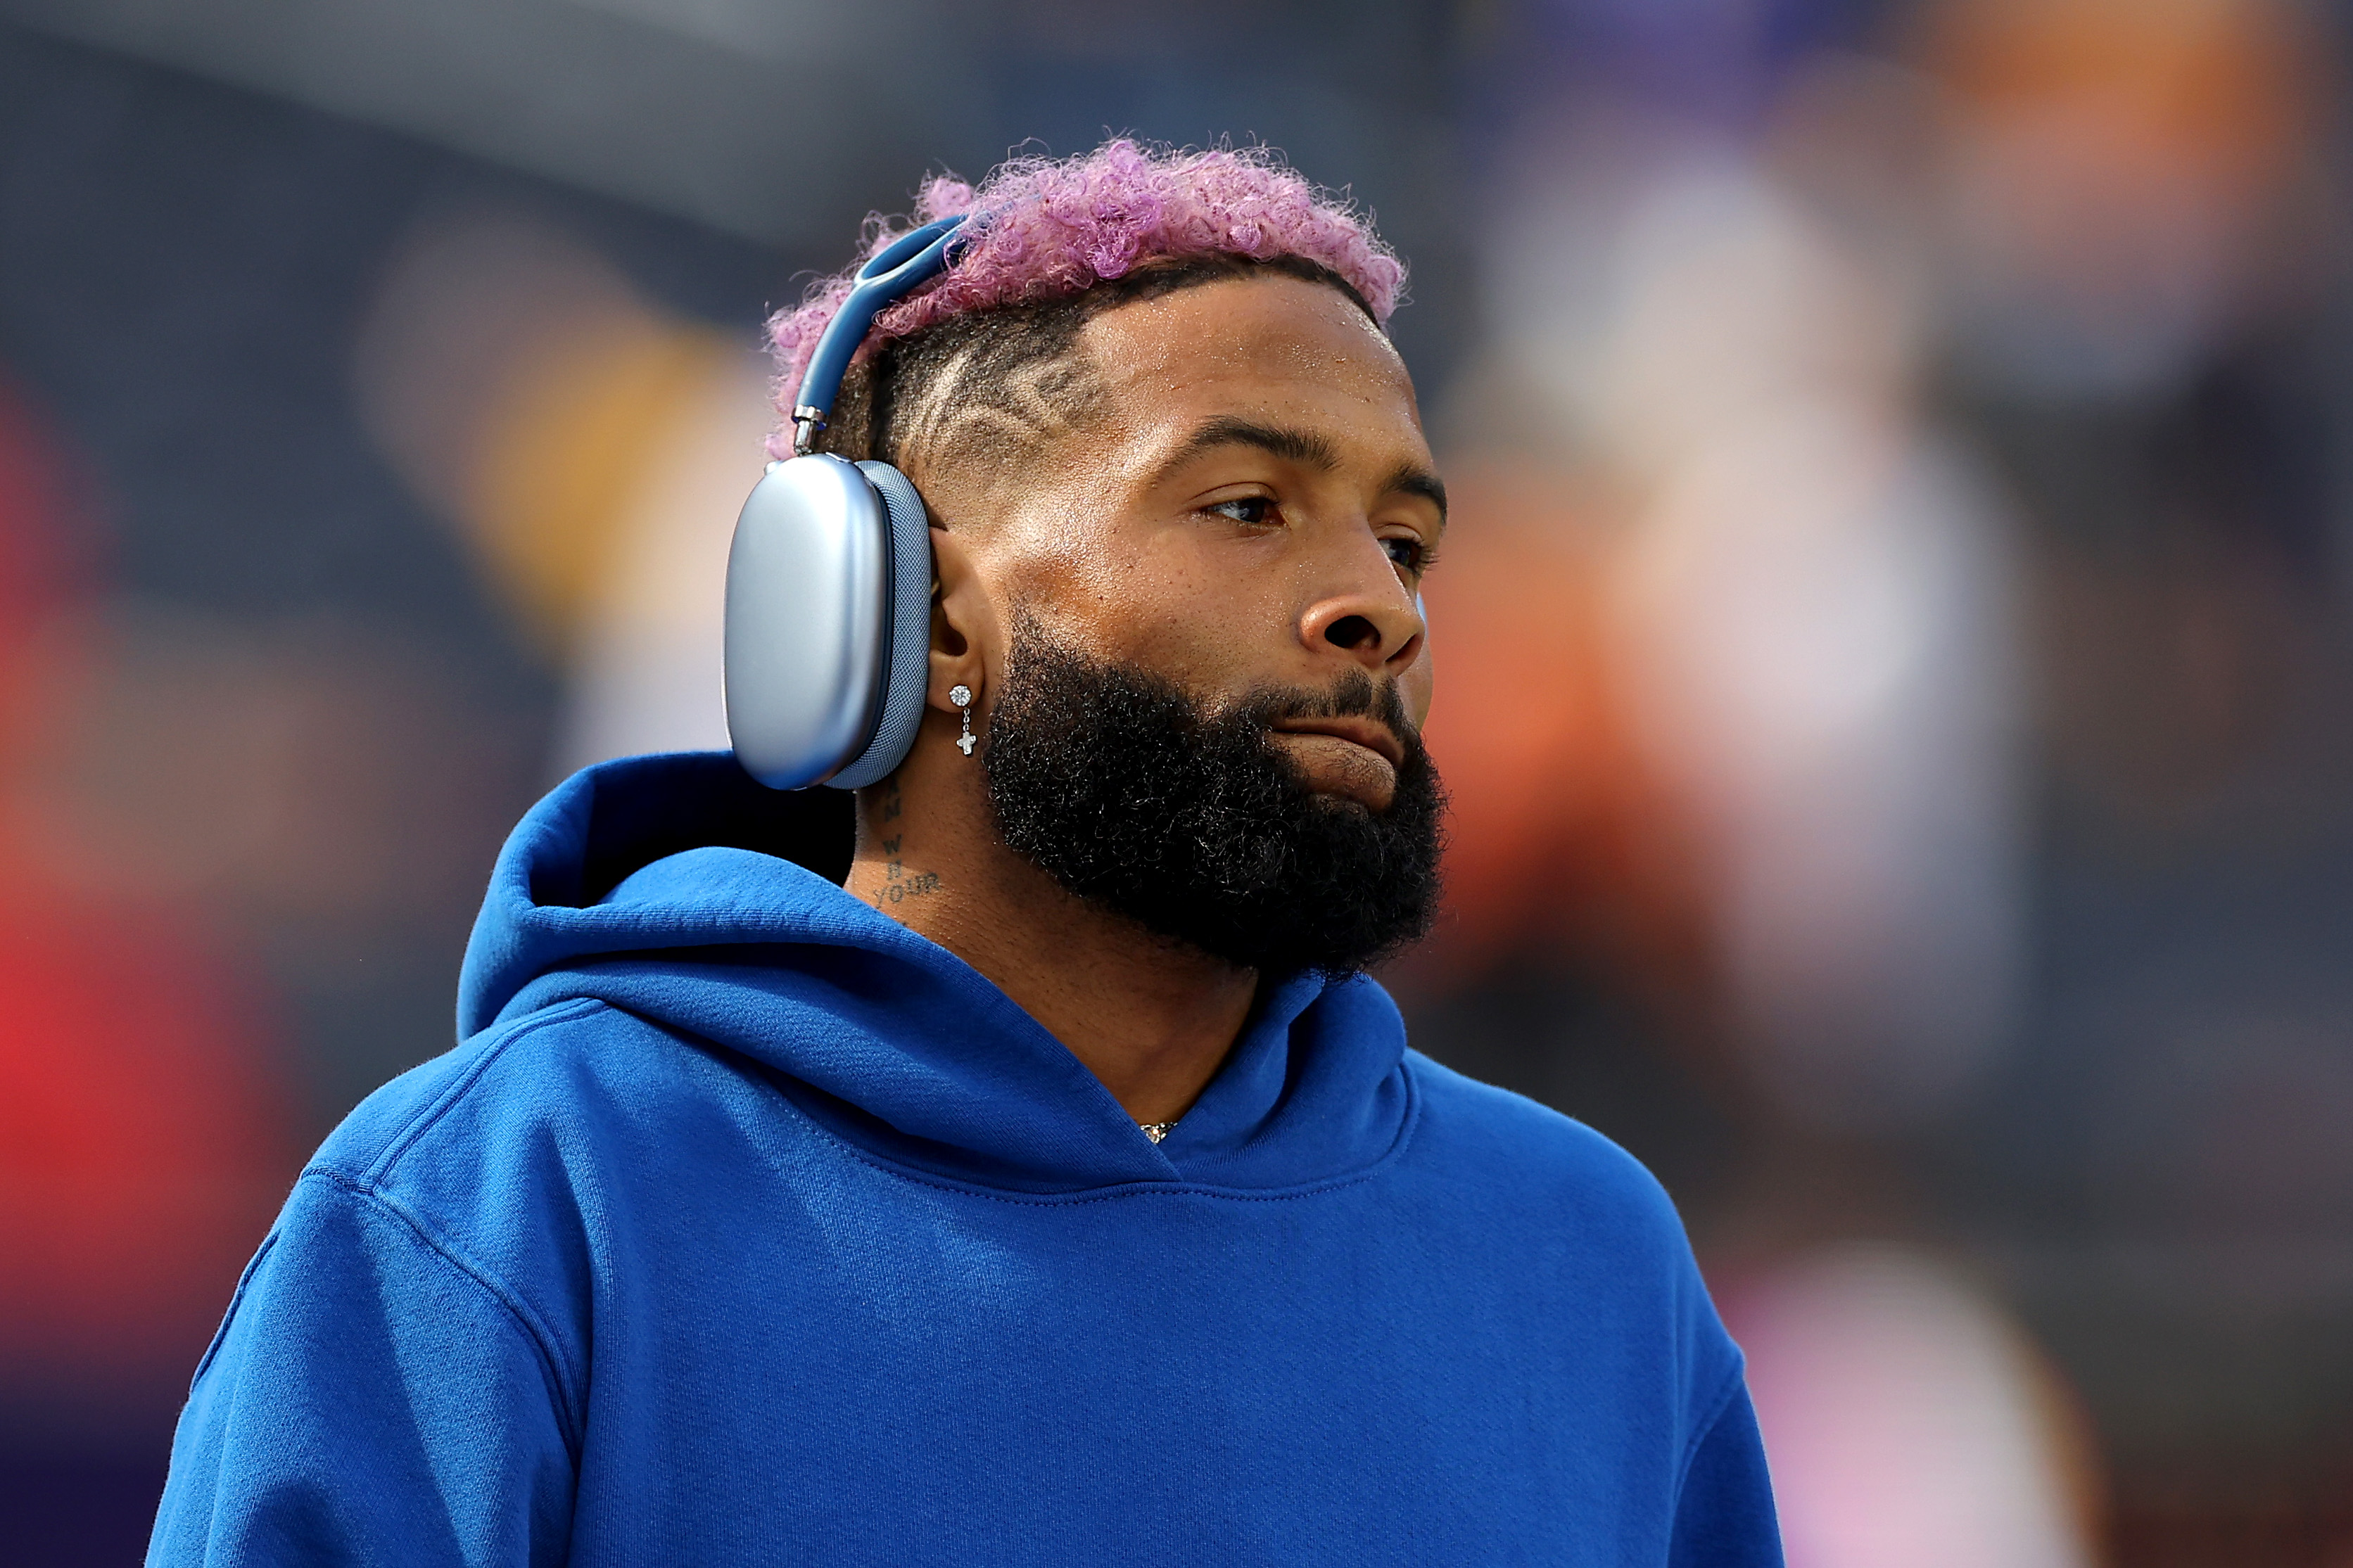 Odell Beckham Jr. at SoFi Stadium on February 13, 2022, in Inglewood, California. | Source: Getty Images